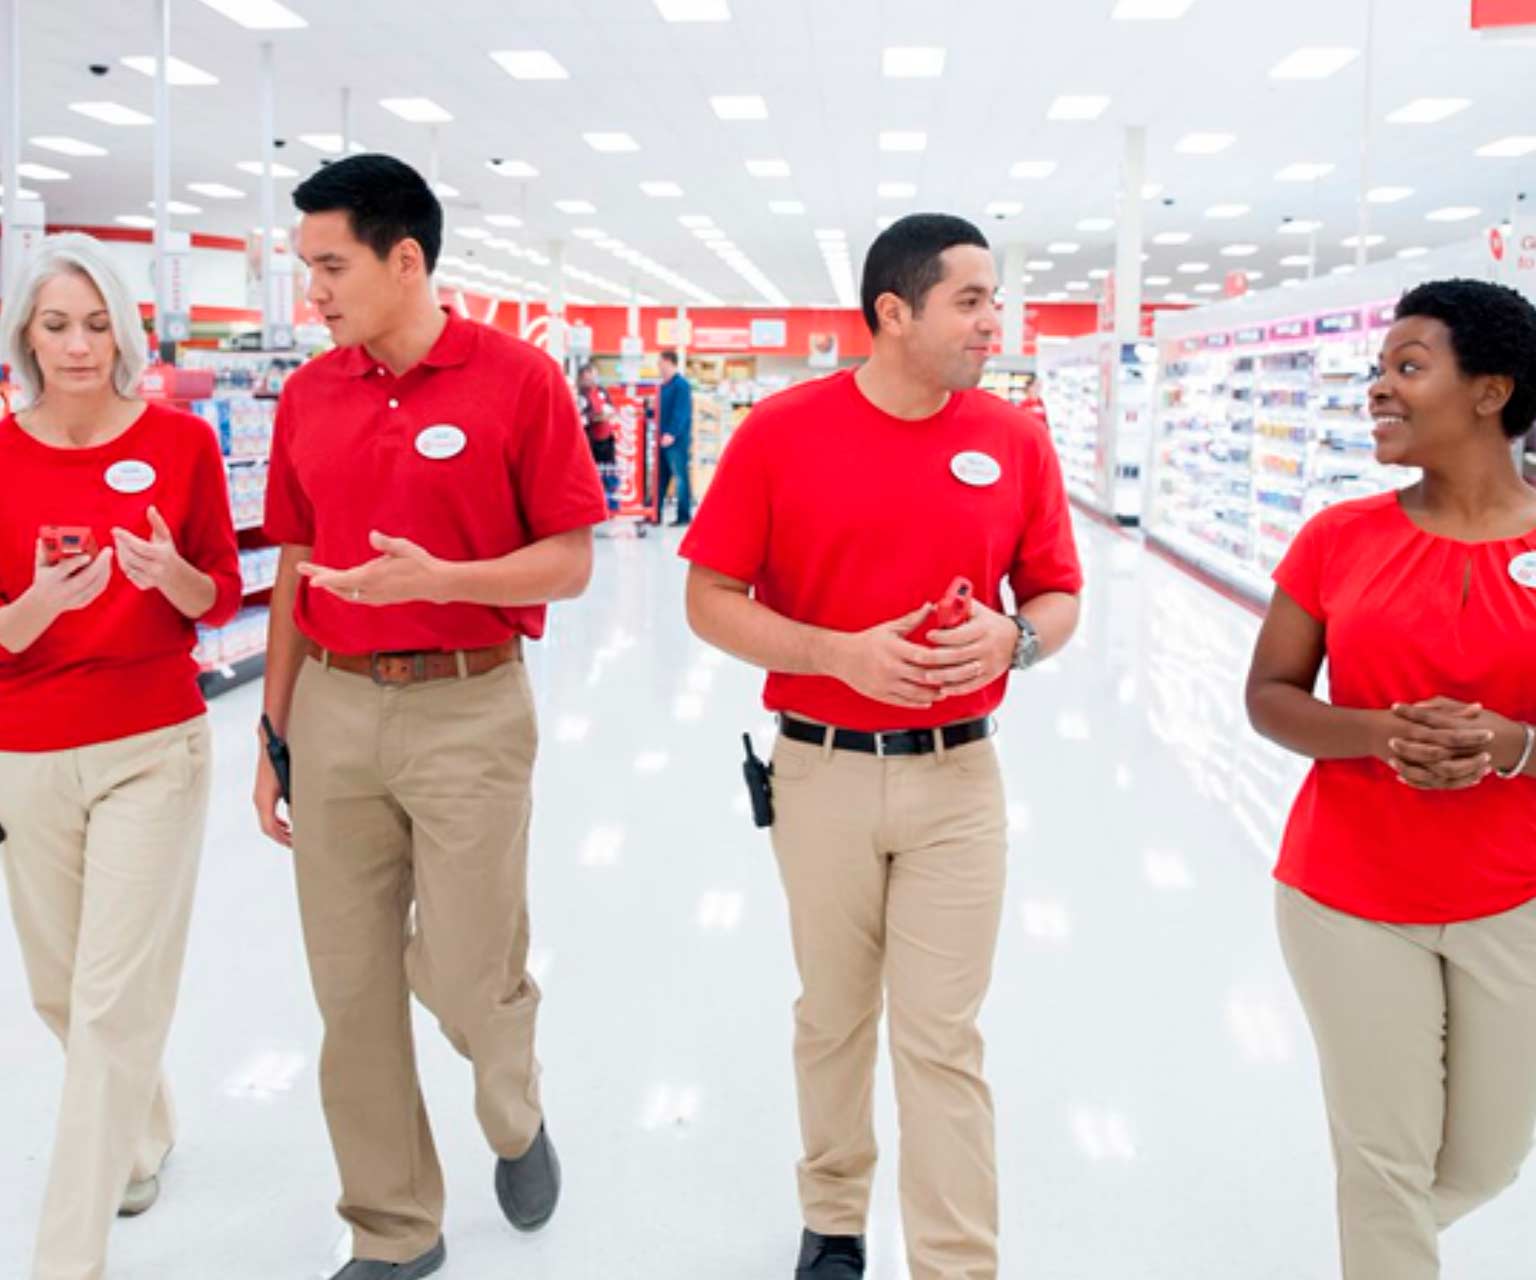 Target: Retail Solutions Challenges